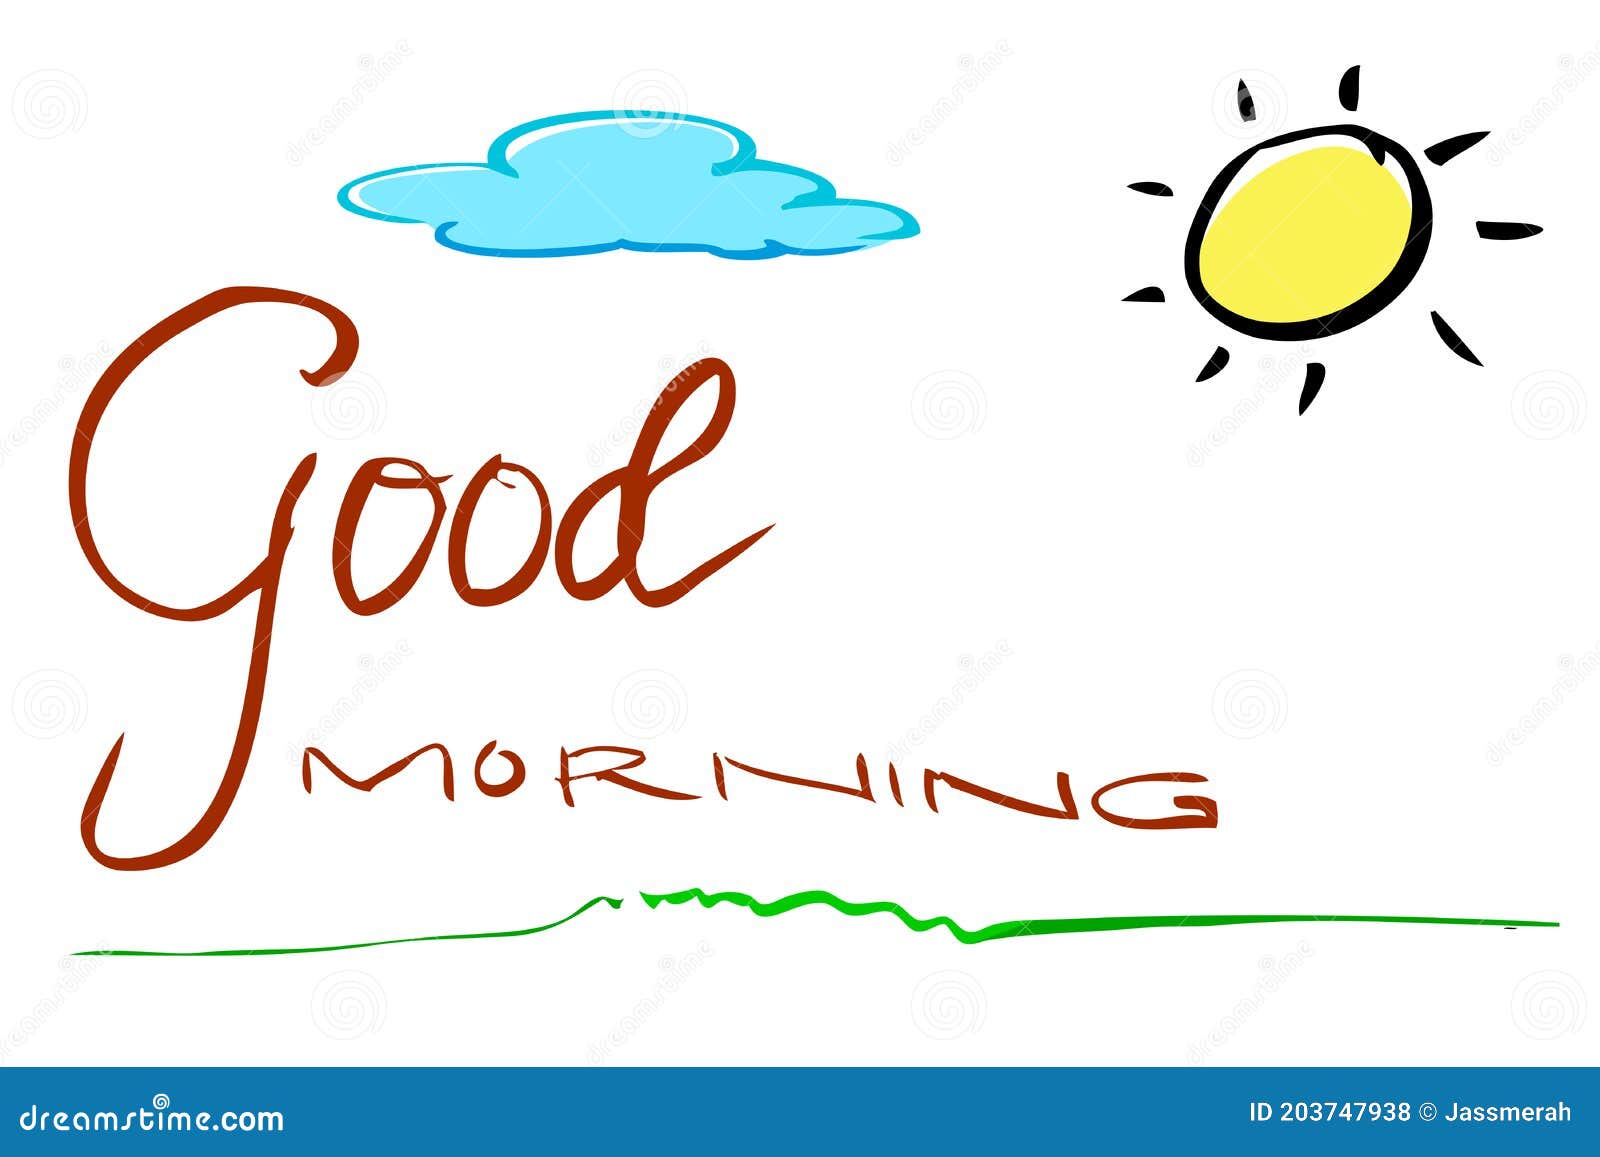 Simple Vector Hand Draw Sketch Lettering, Good Morning, Sun and ...